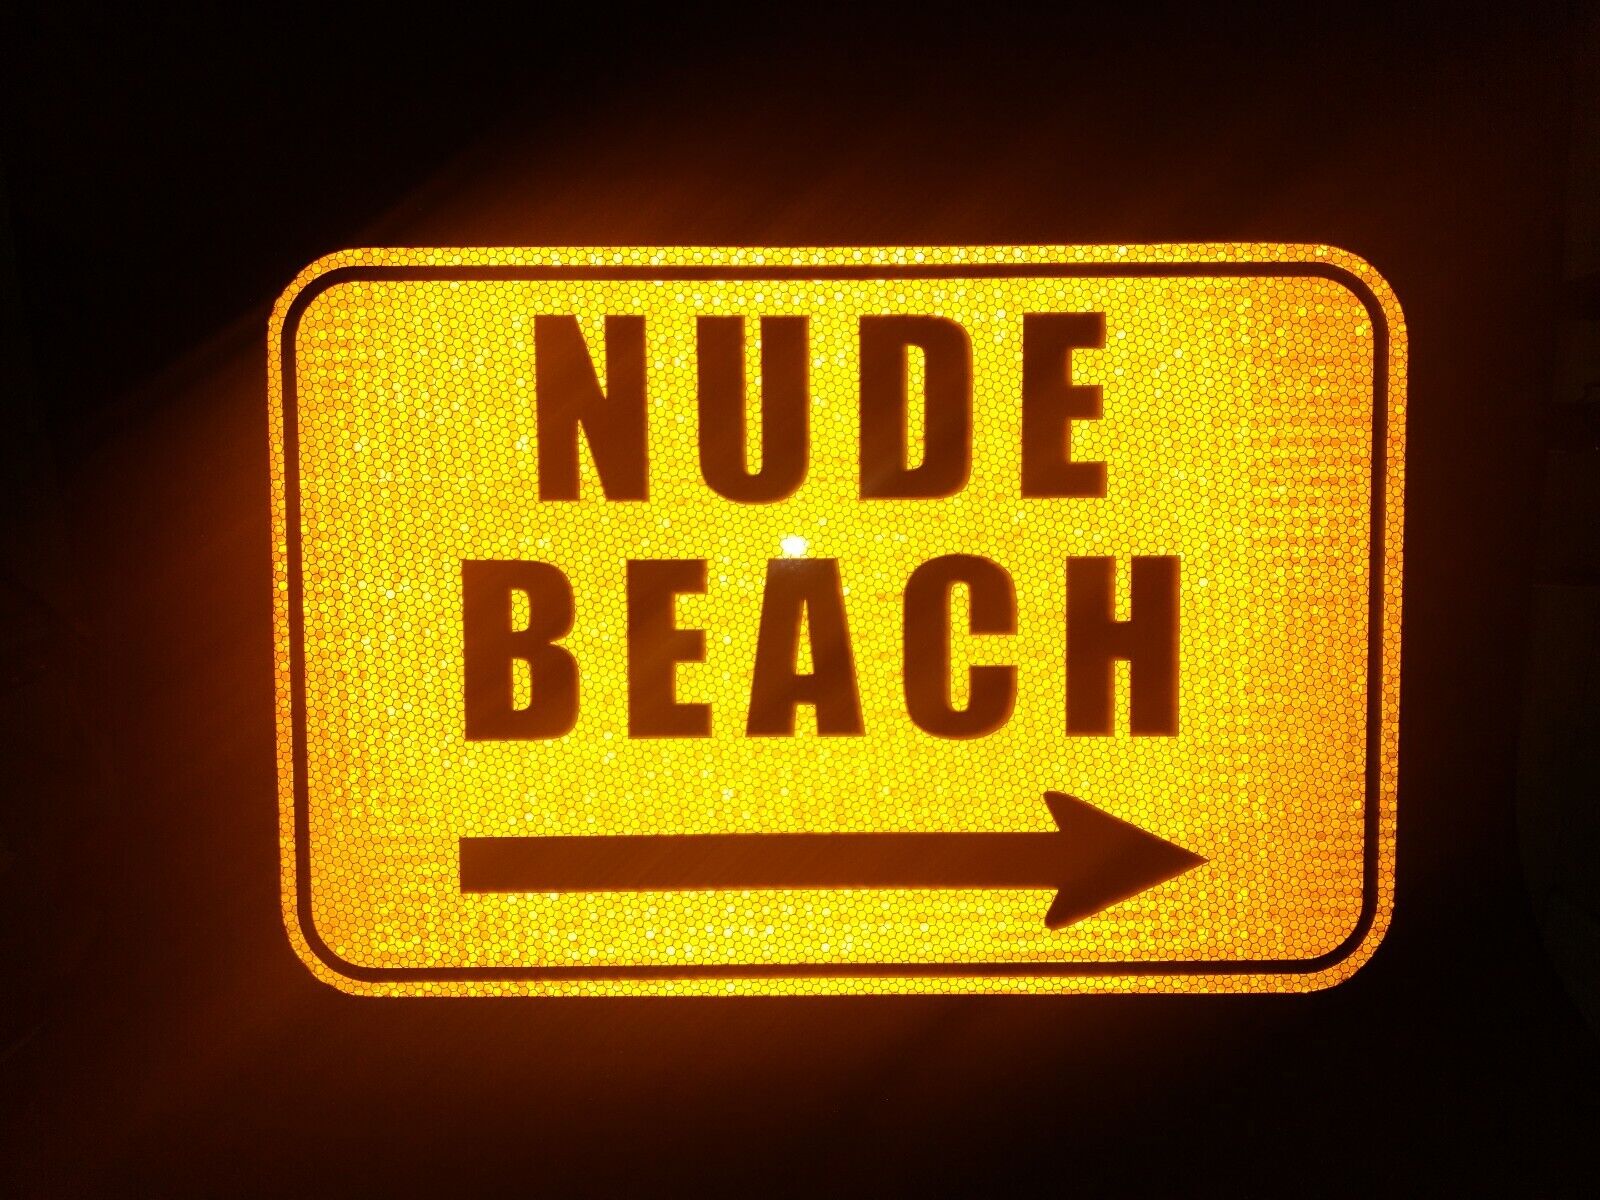 NUDE BEACH road sign, 18X12, Bar sign, Man Cave, swimming pool sign, beach